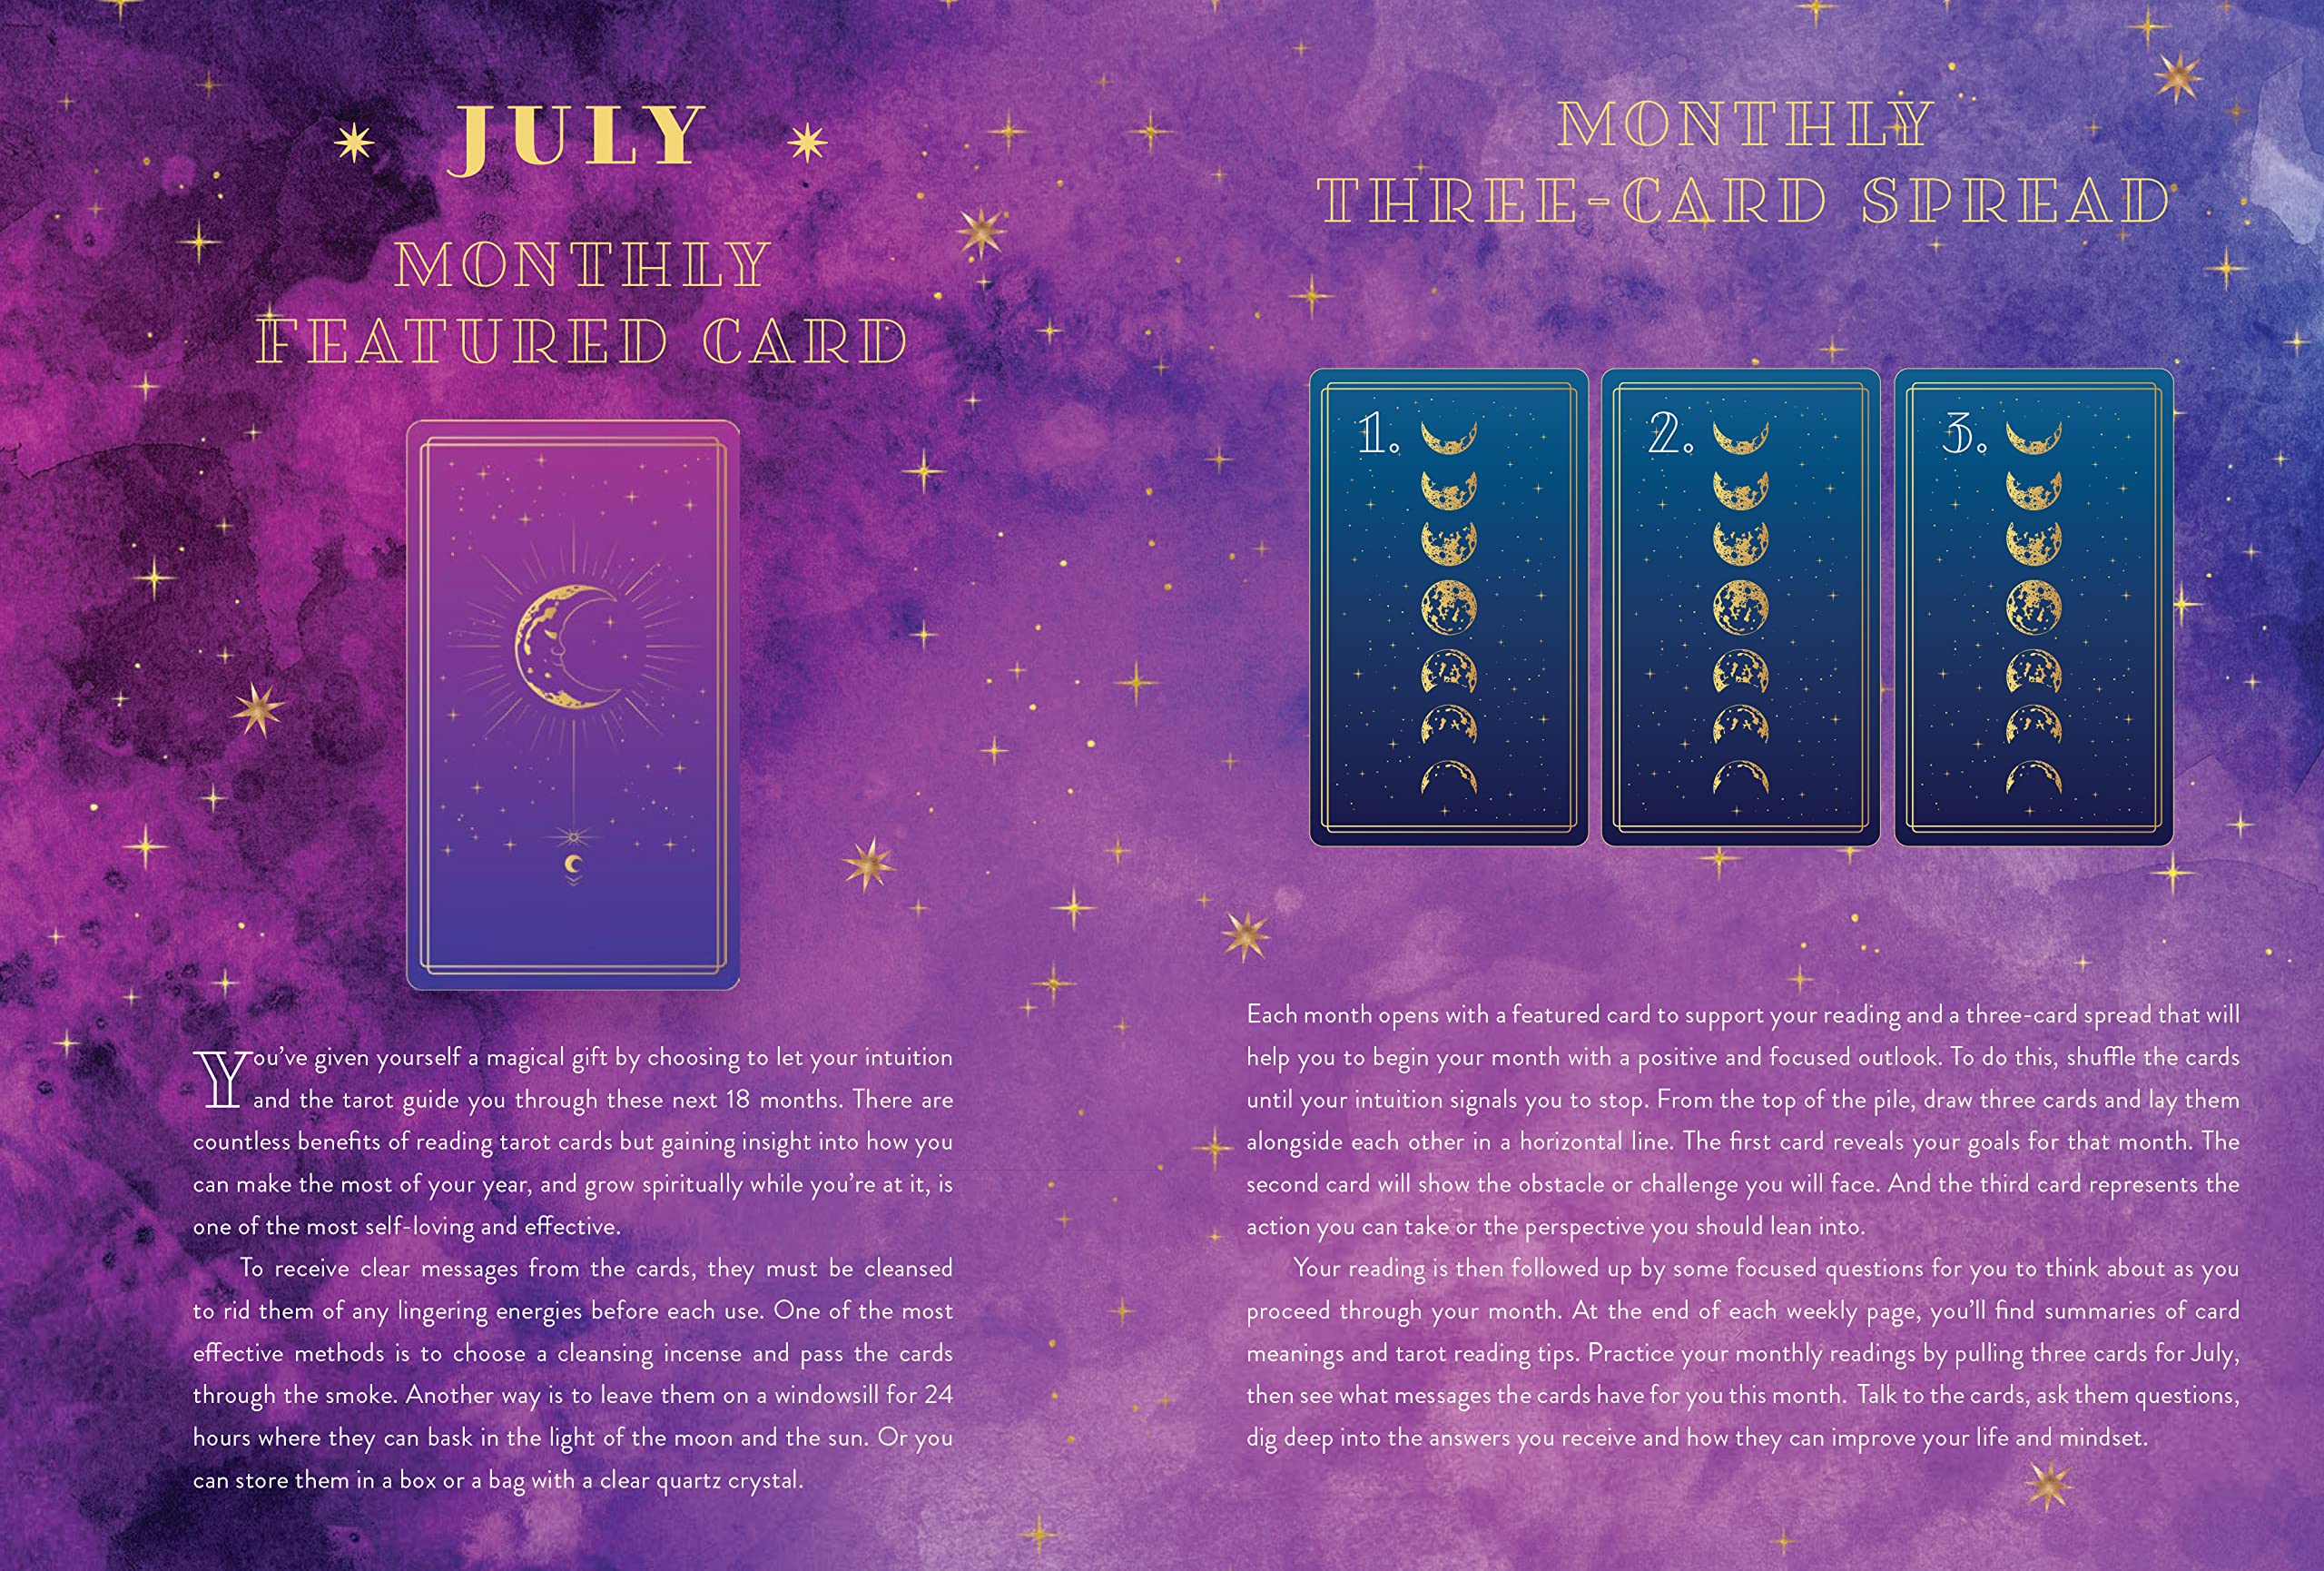 Guided by Tarot 2024 Weekly Planner July 2023 December 2024 Rock